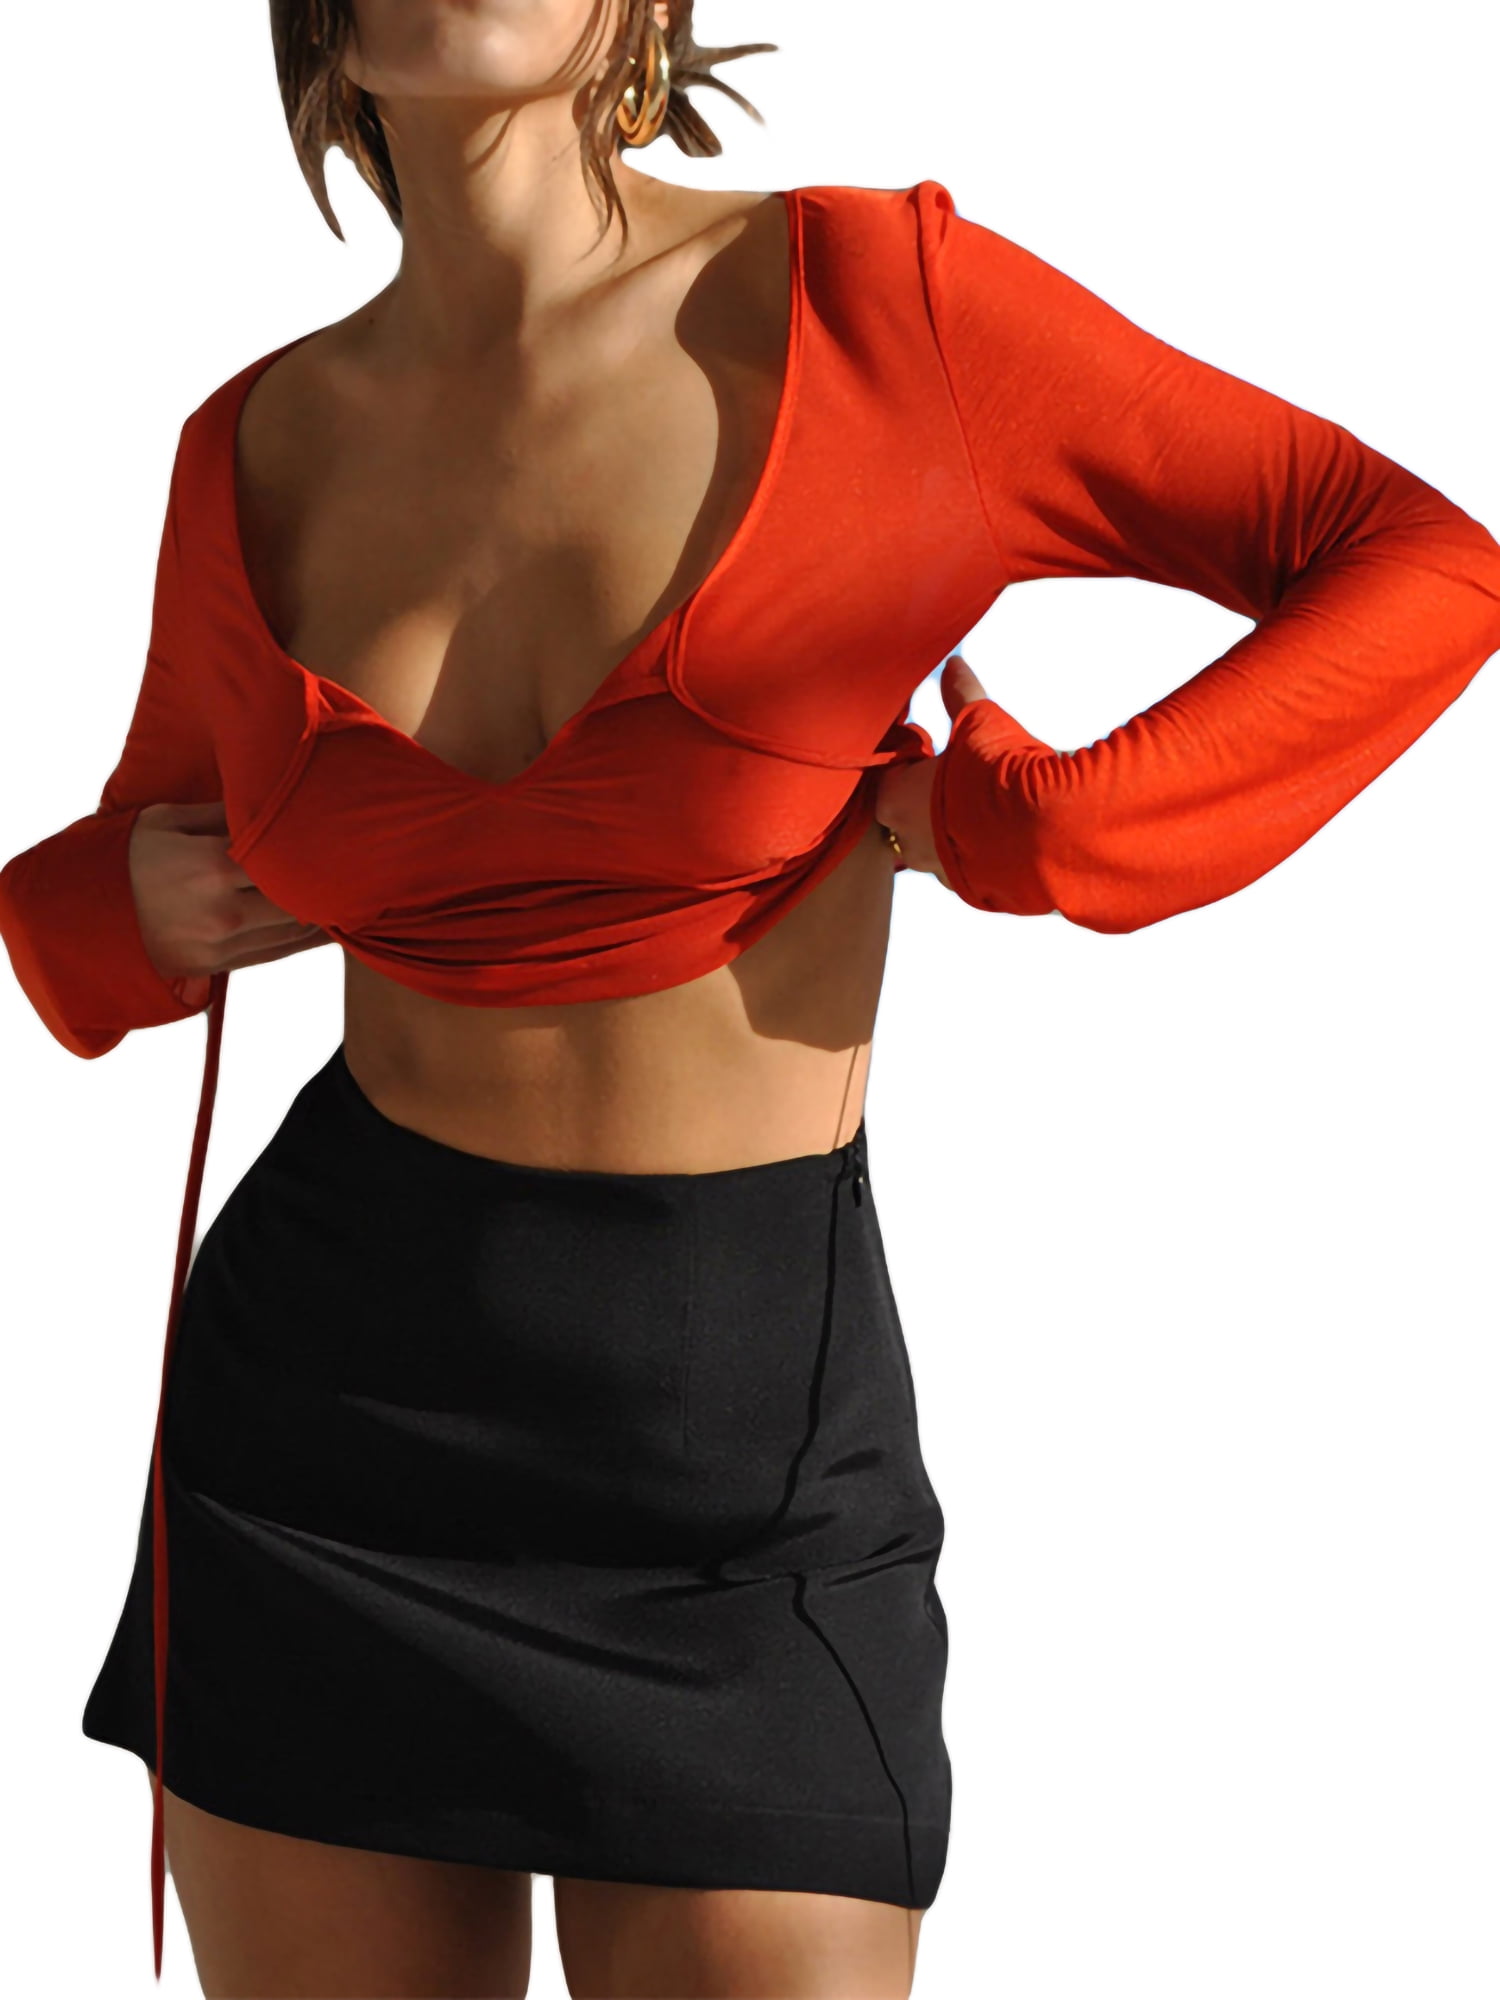 Liacowi Mesh Sheer Tie Up Crop Tops Women Long Sleeve Low Cut Tops and  Blouse Summer See Through Beach Sexy Casual Shirts